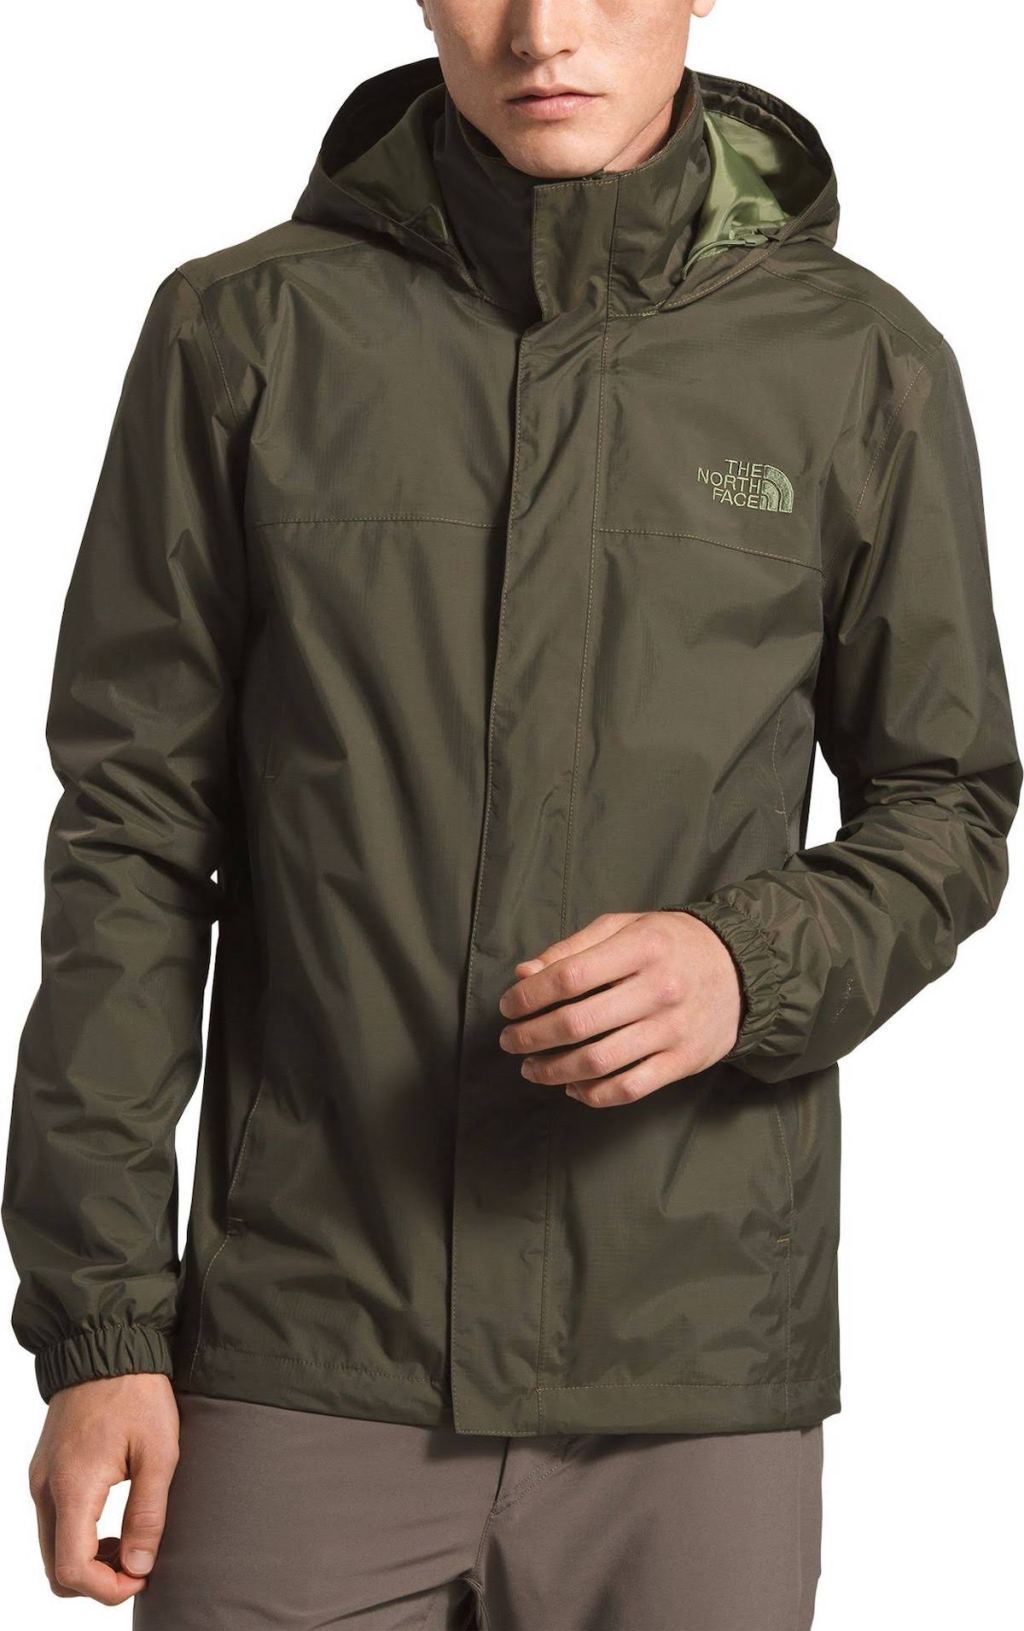 stock photo of man wearing green the north face jacket